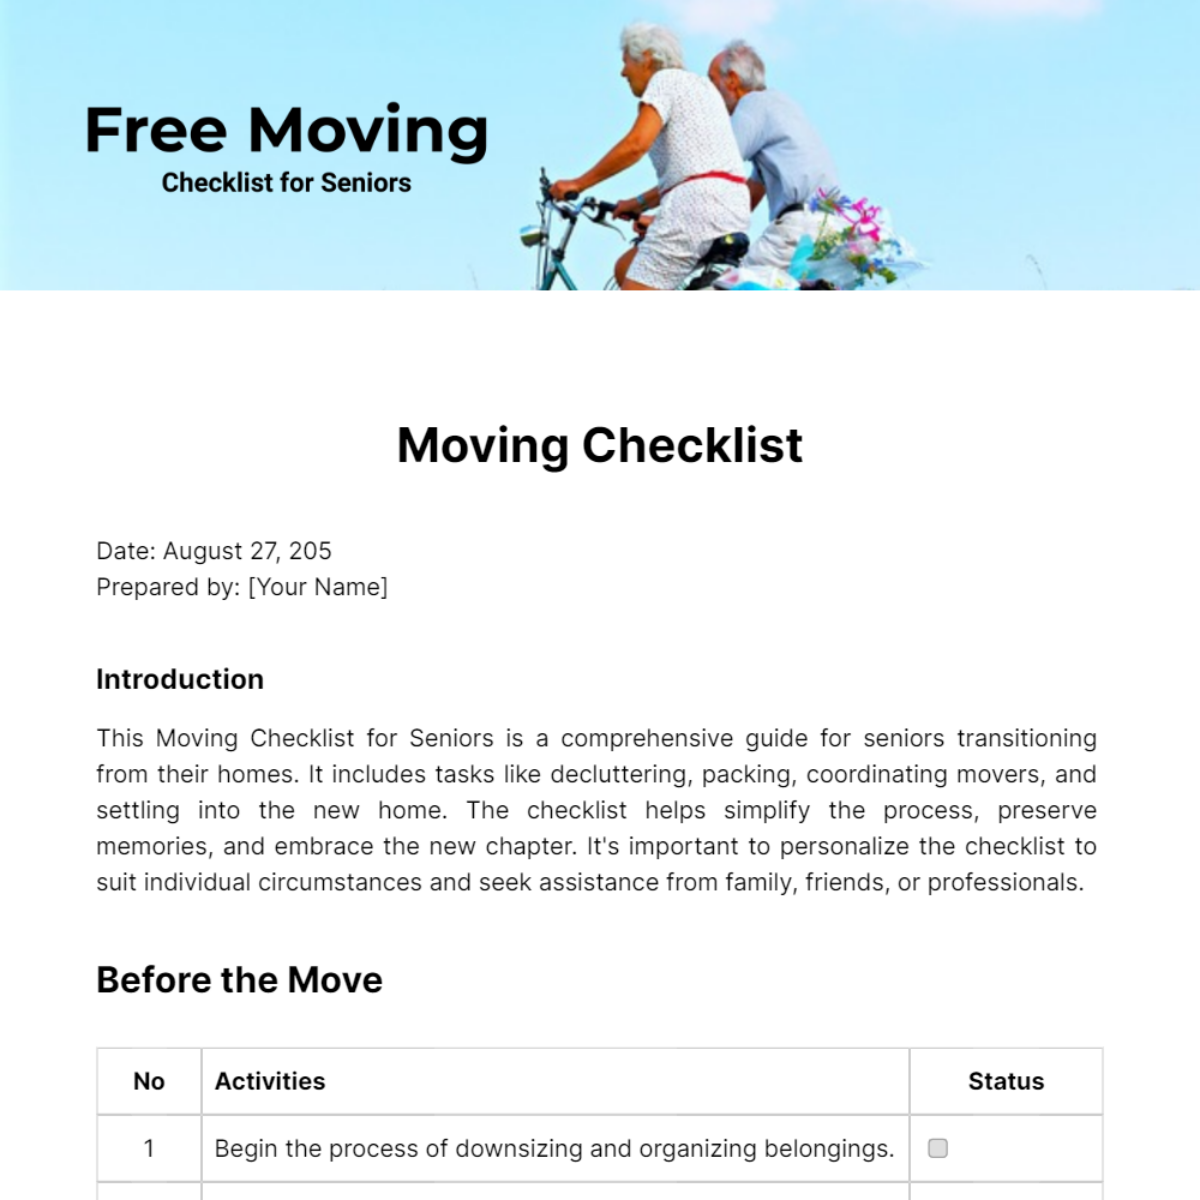 Free Moving Checklist for Seniors Template